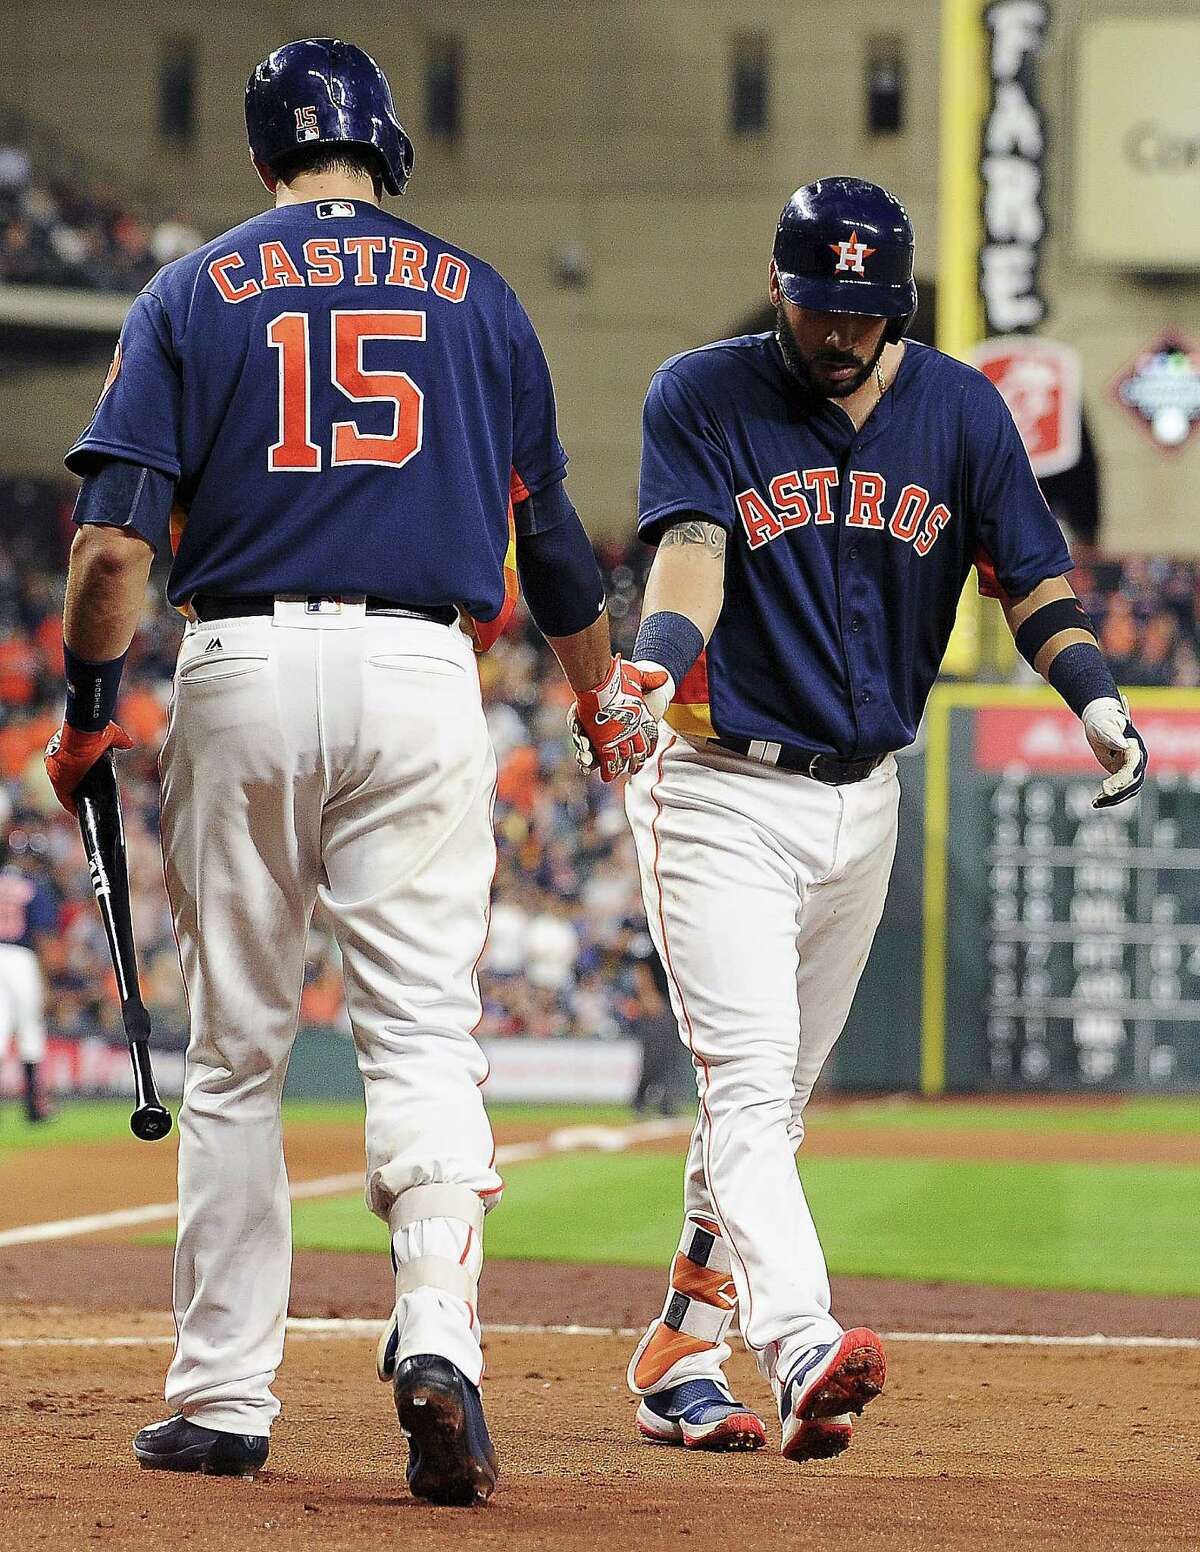 HOUSTON, TX - APRIL 24: Marwin Gonzalez #9 of the Houston Astros celebrates his solo home run with Jason Castro #15 during the second inning against the Boston Red Sox at Minute Maid Park on April 24, 2016 in Houston, Texas.